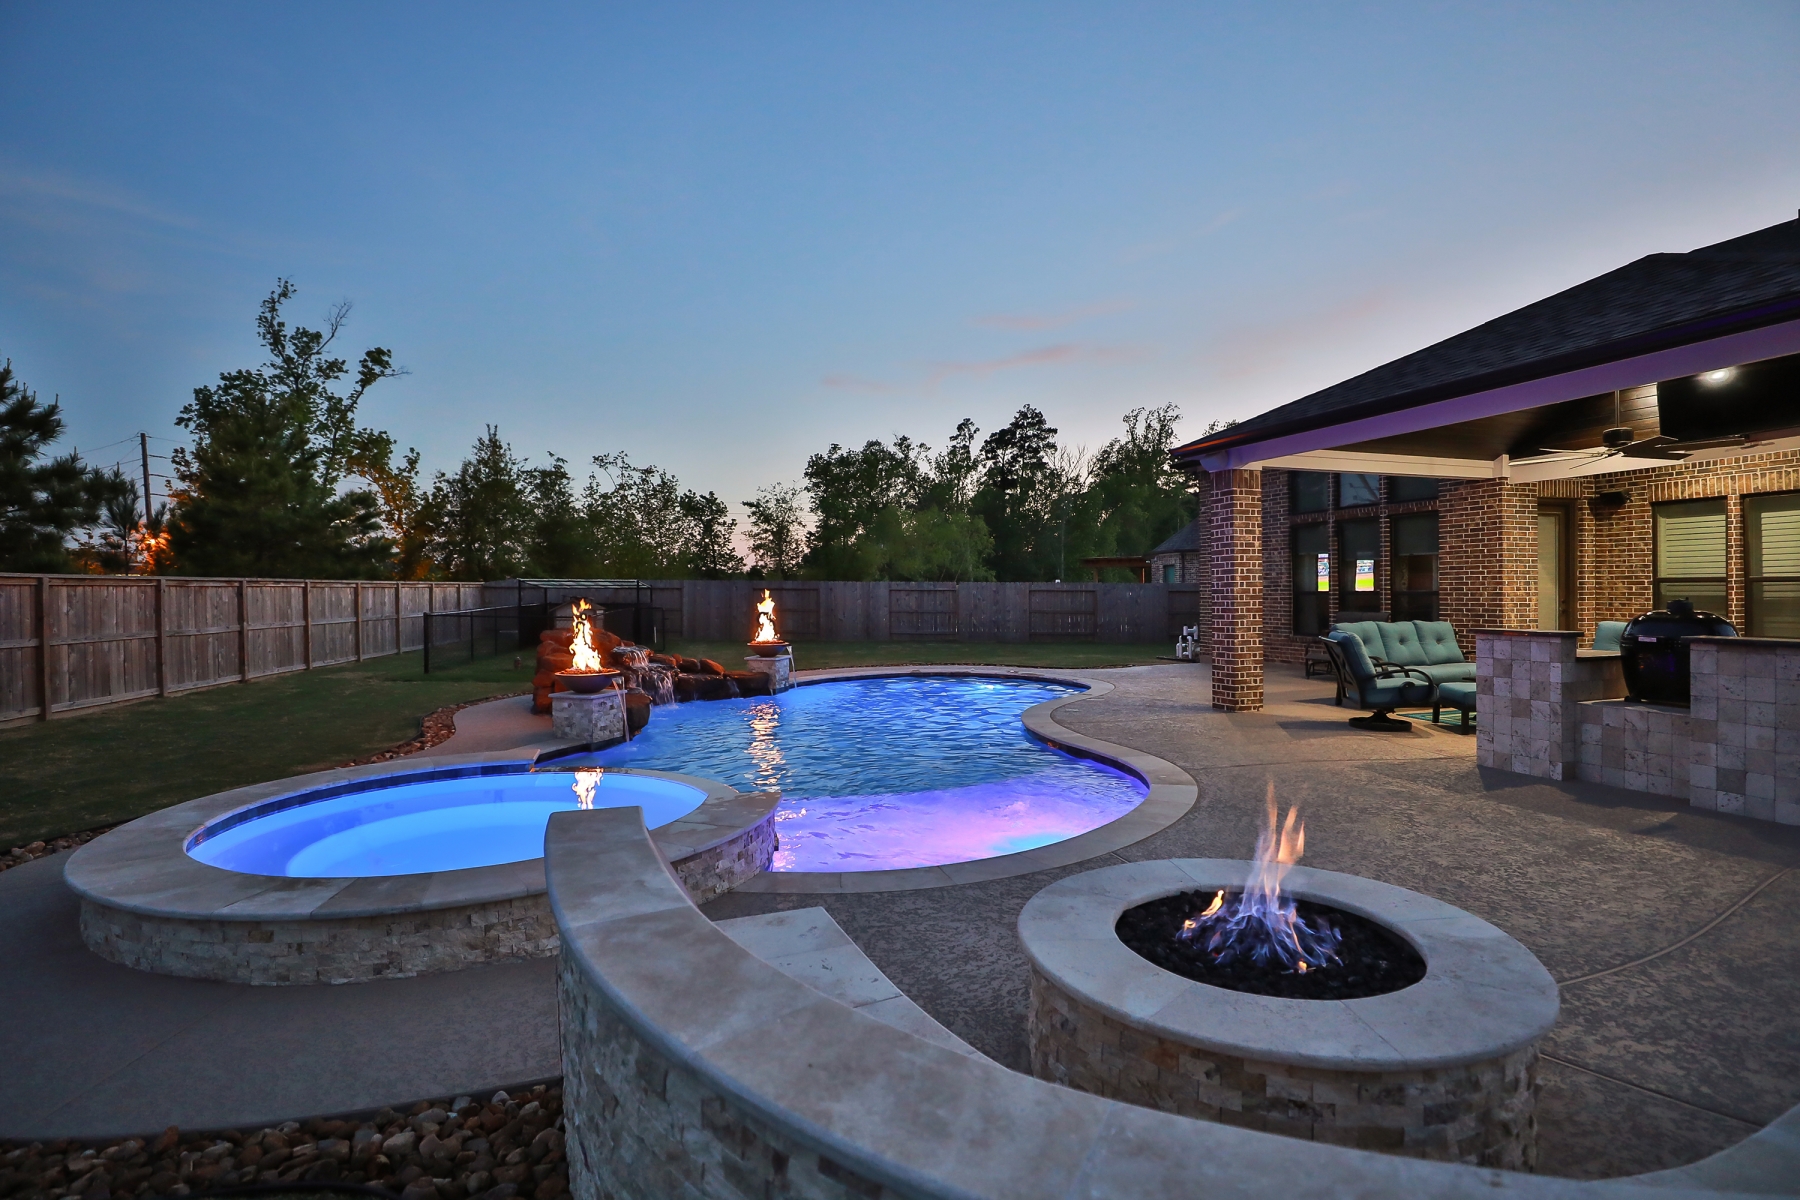 Poolside Fire Pit - Freeform Pool with Rock Waterfall, Custom Lighting and Fire Bowls